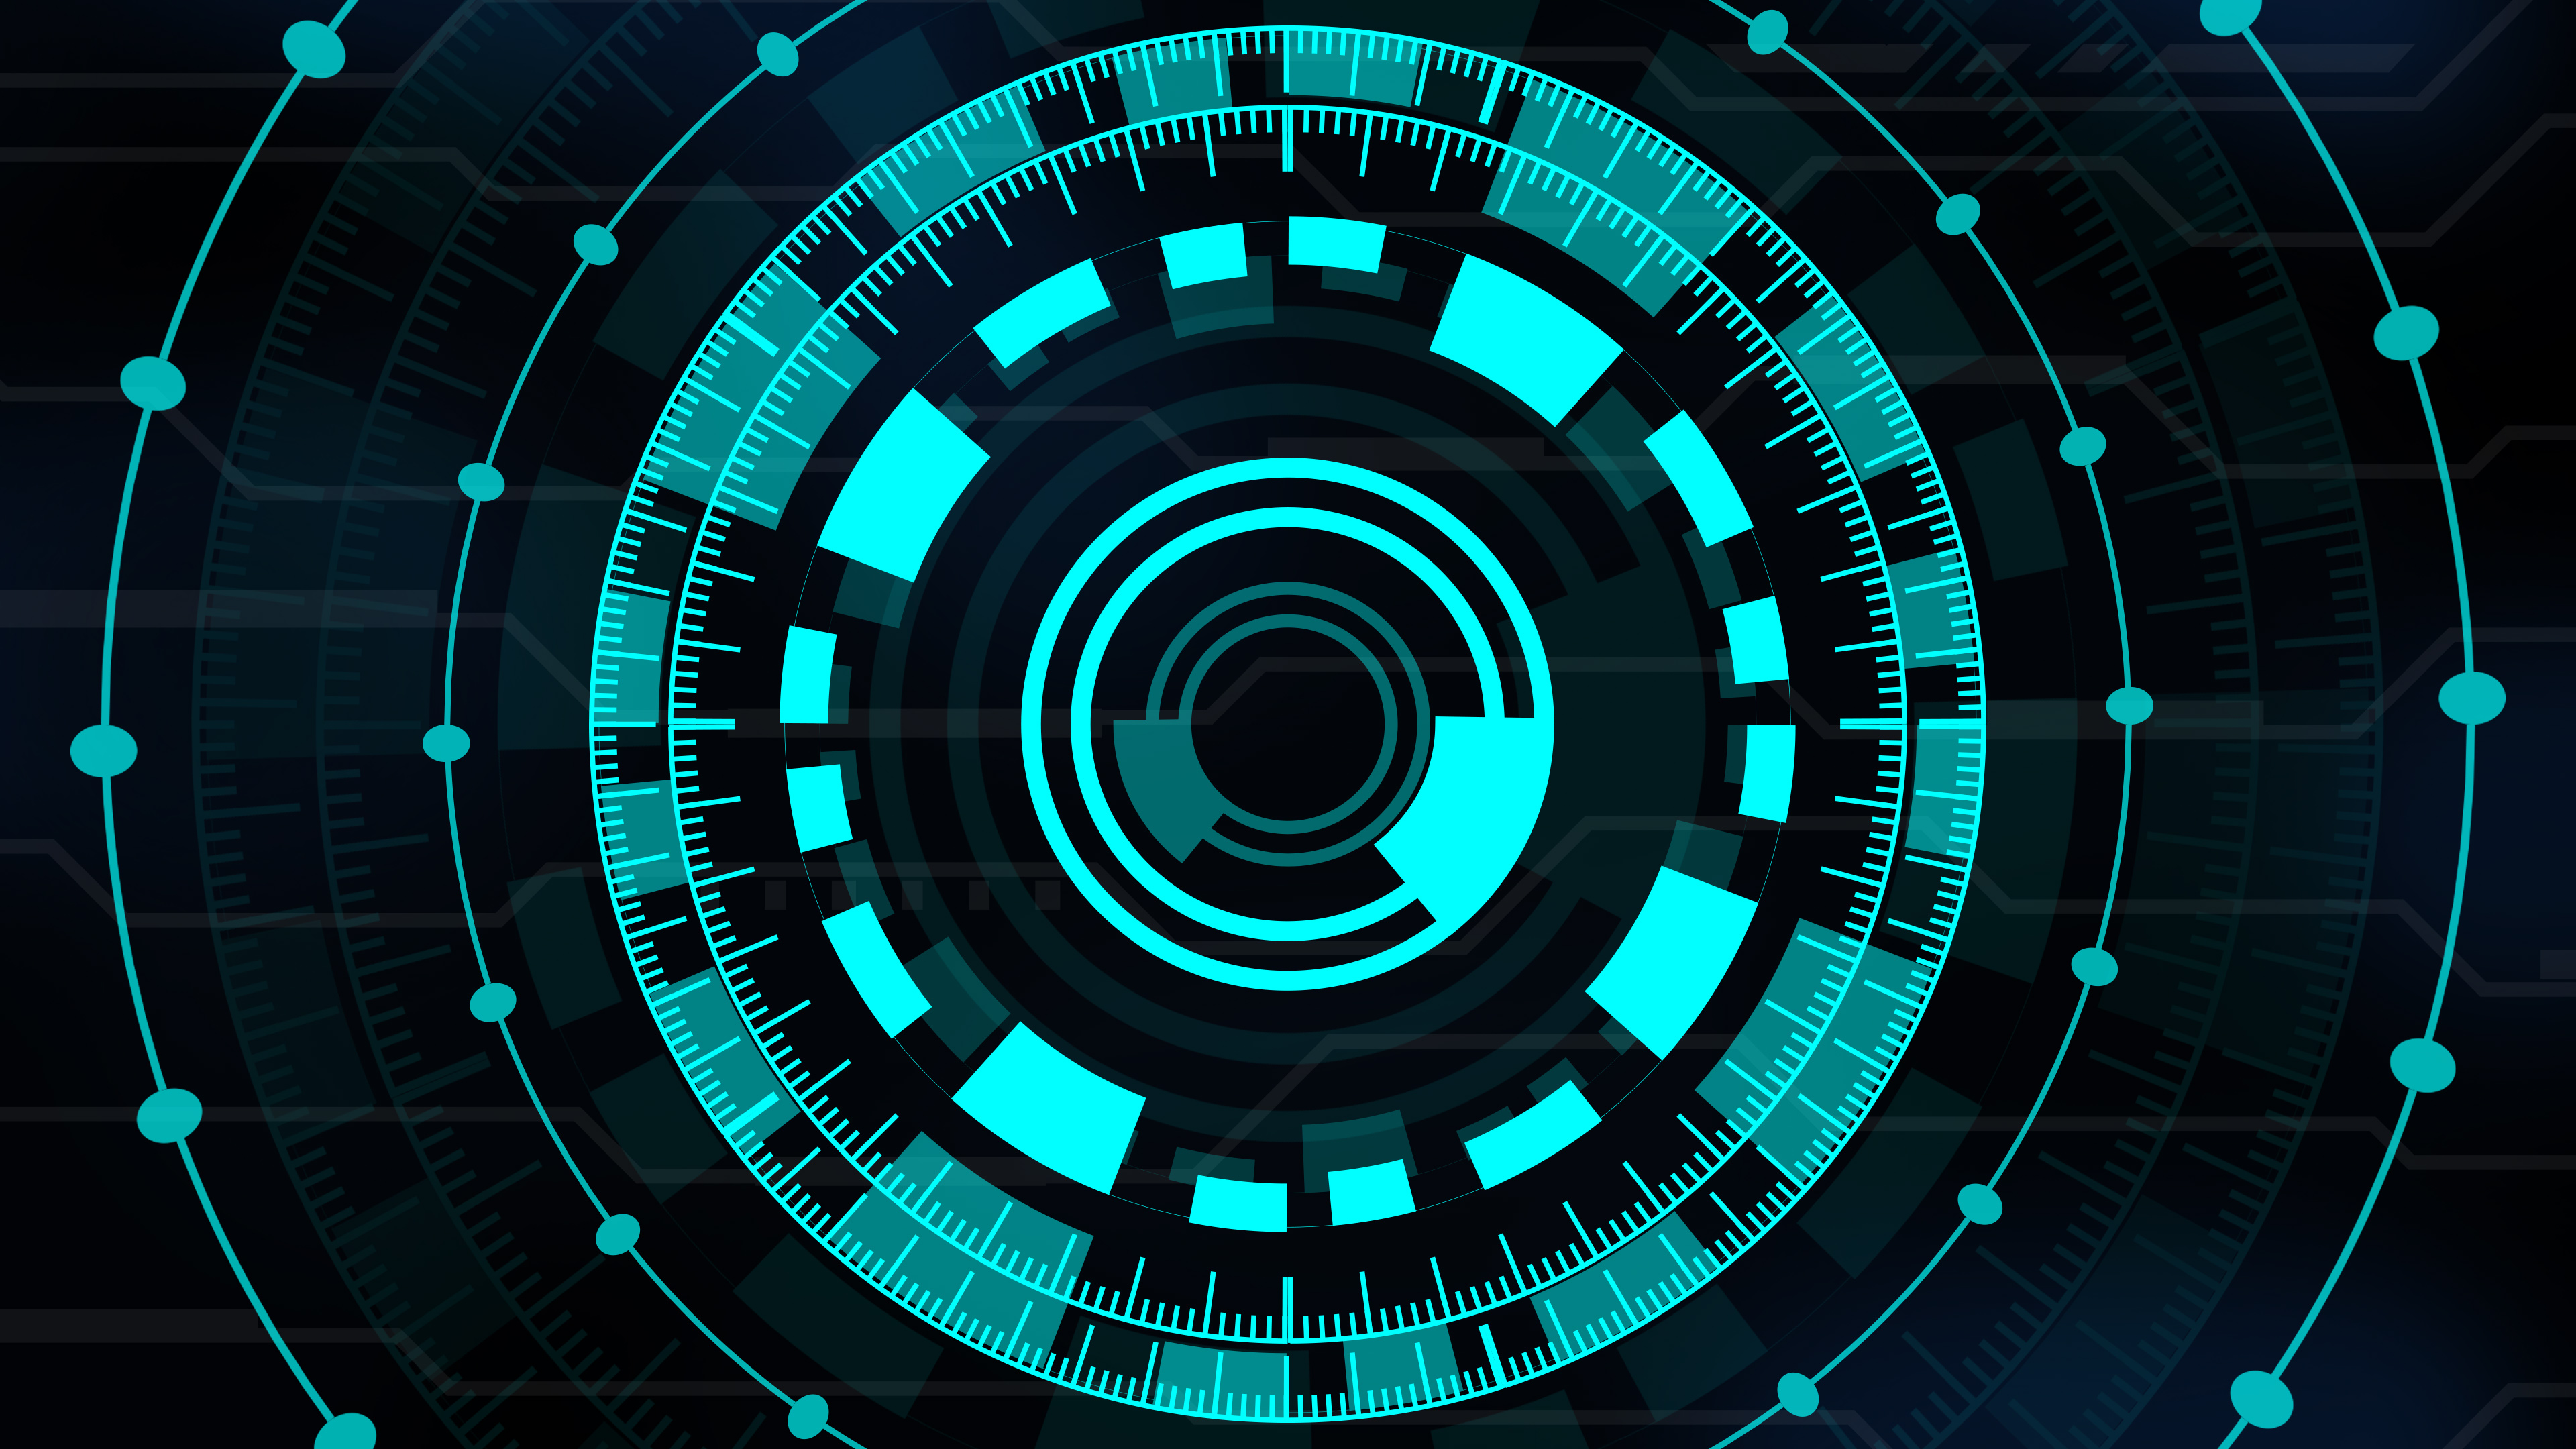 Abstract AI Art Vibrant Circle and Connecting Line Patterns on Turquoise  and Black Background - veeForu